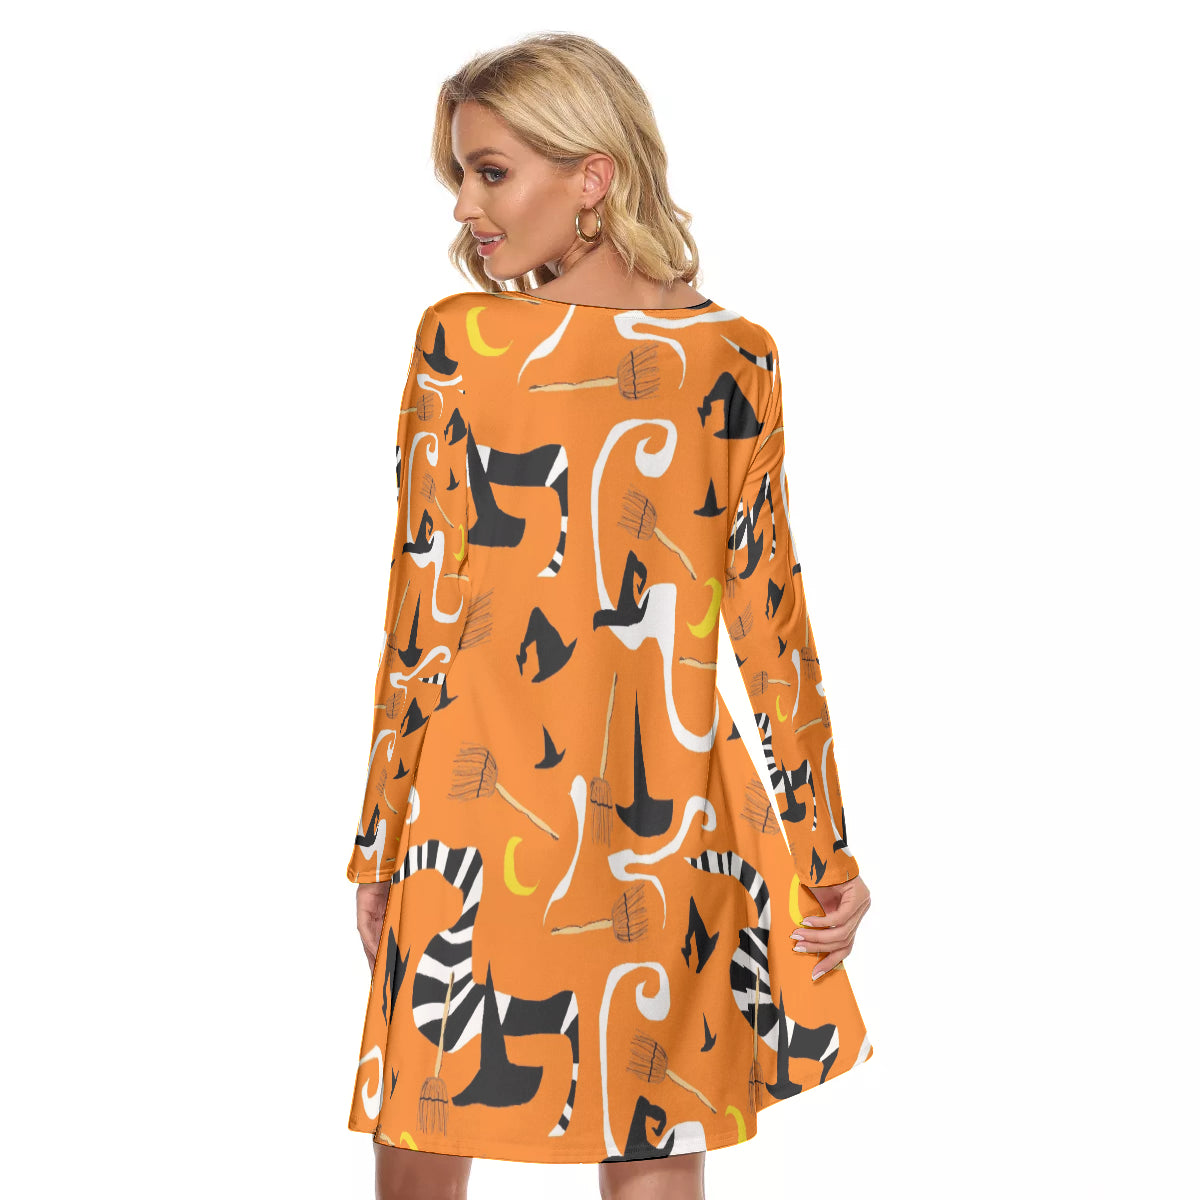 Witches Hats and Brooms All-Over Print Women's Crew Neck Dress